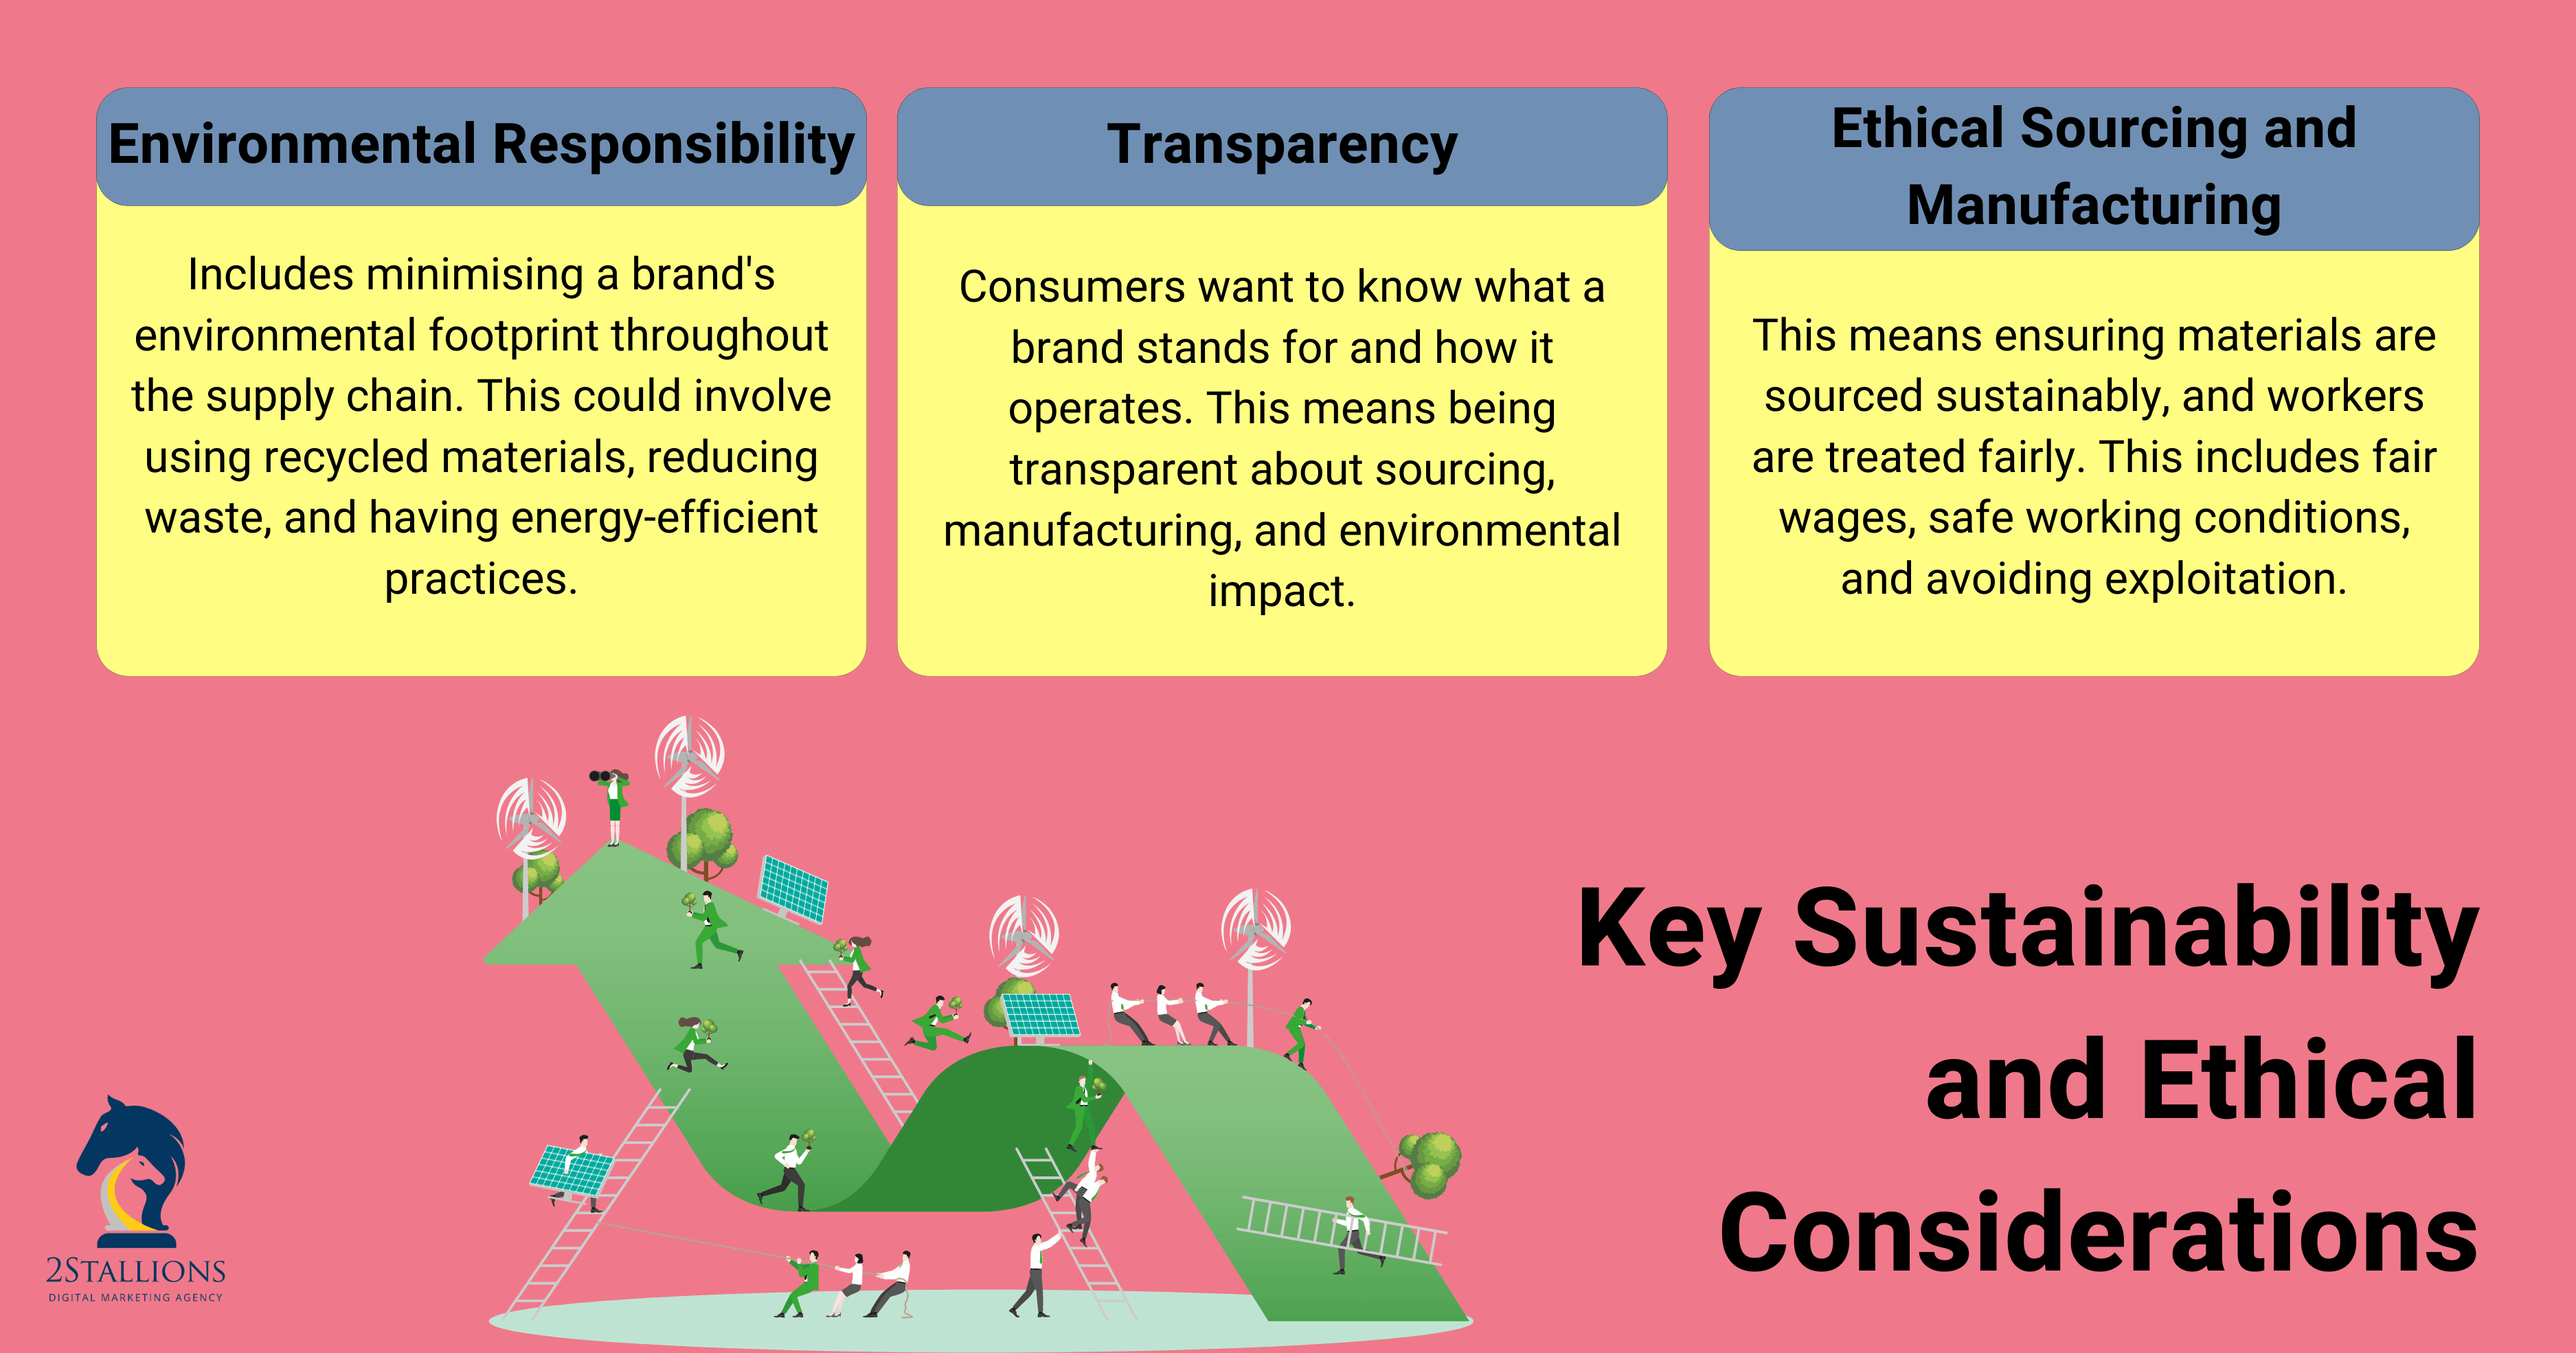 Sustainability And Ethical Considerations In Branding | 2Stallions